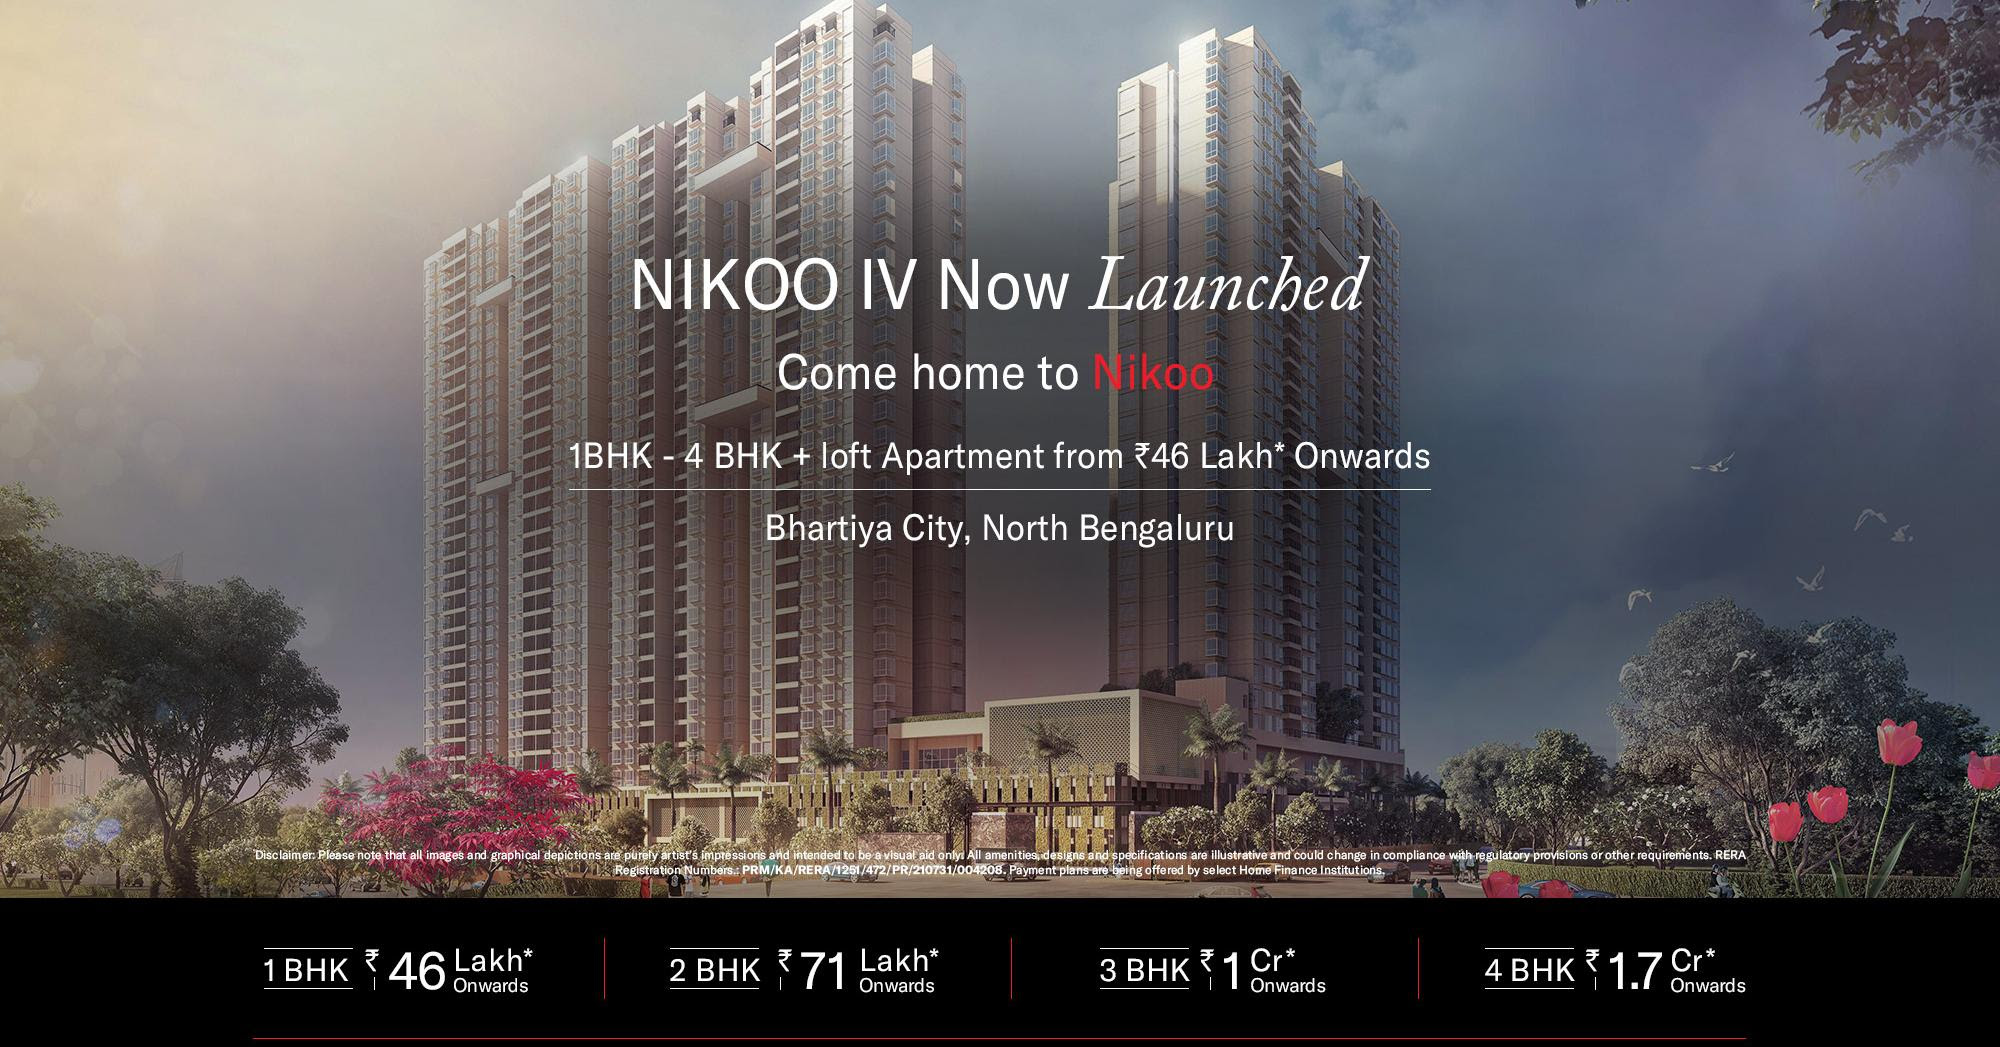 Book 1, 2, 3 & 4 BHK loft apartment price starting Rs 46 Lac at Nikoo Home 4, Bengalore Update